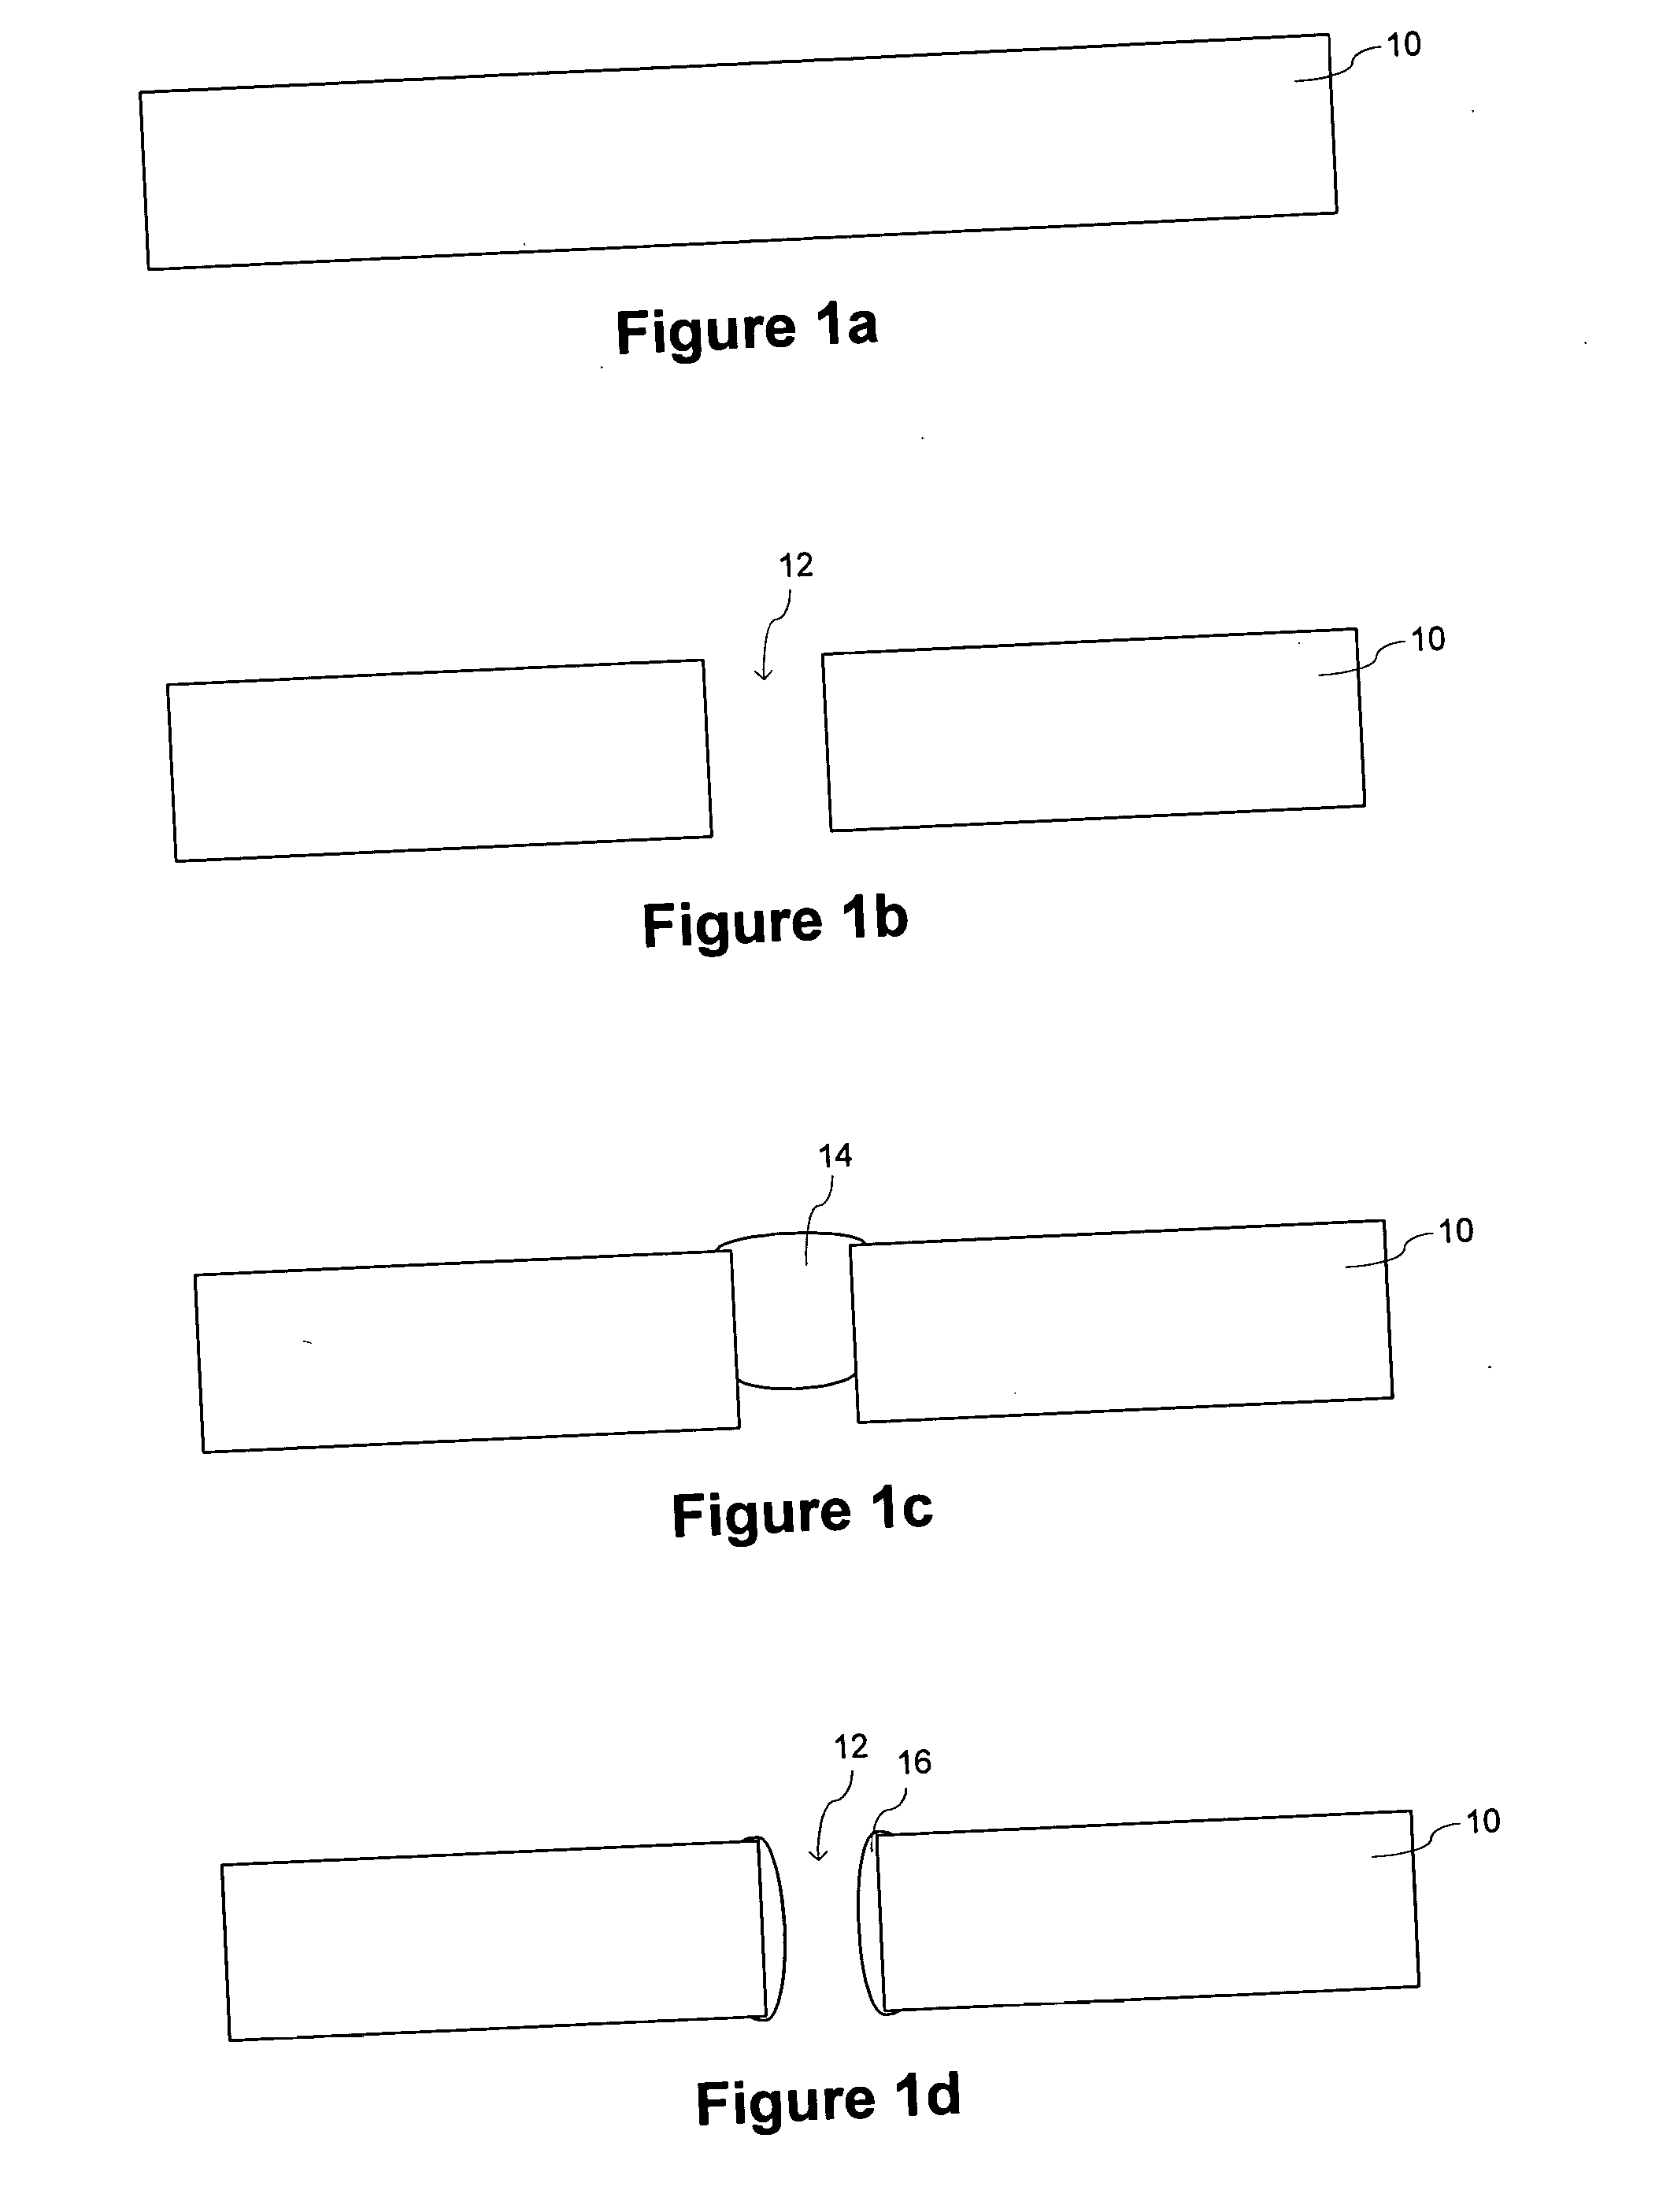 High reliability multlayer circuit substrates and methods for their formation